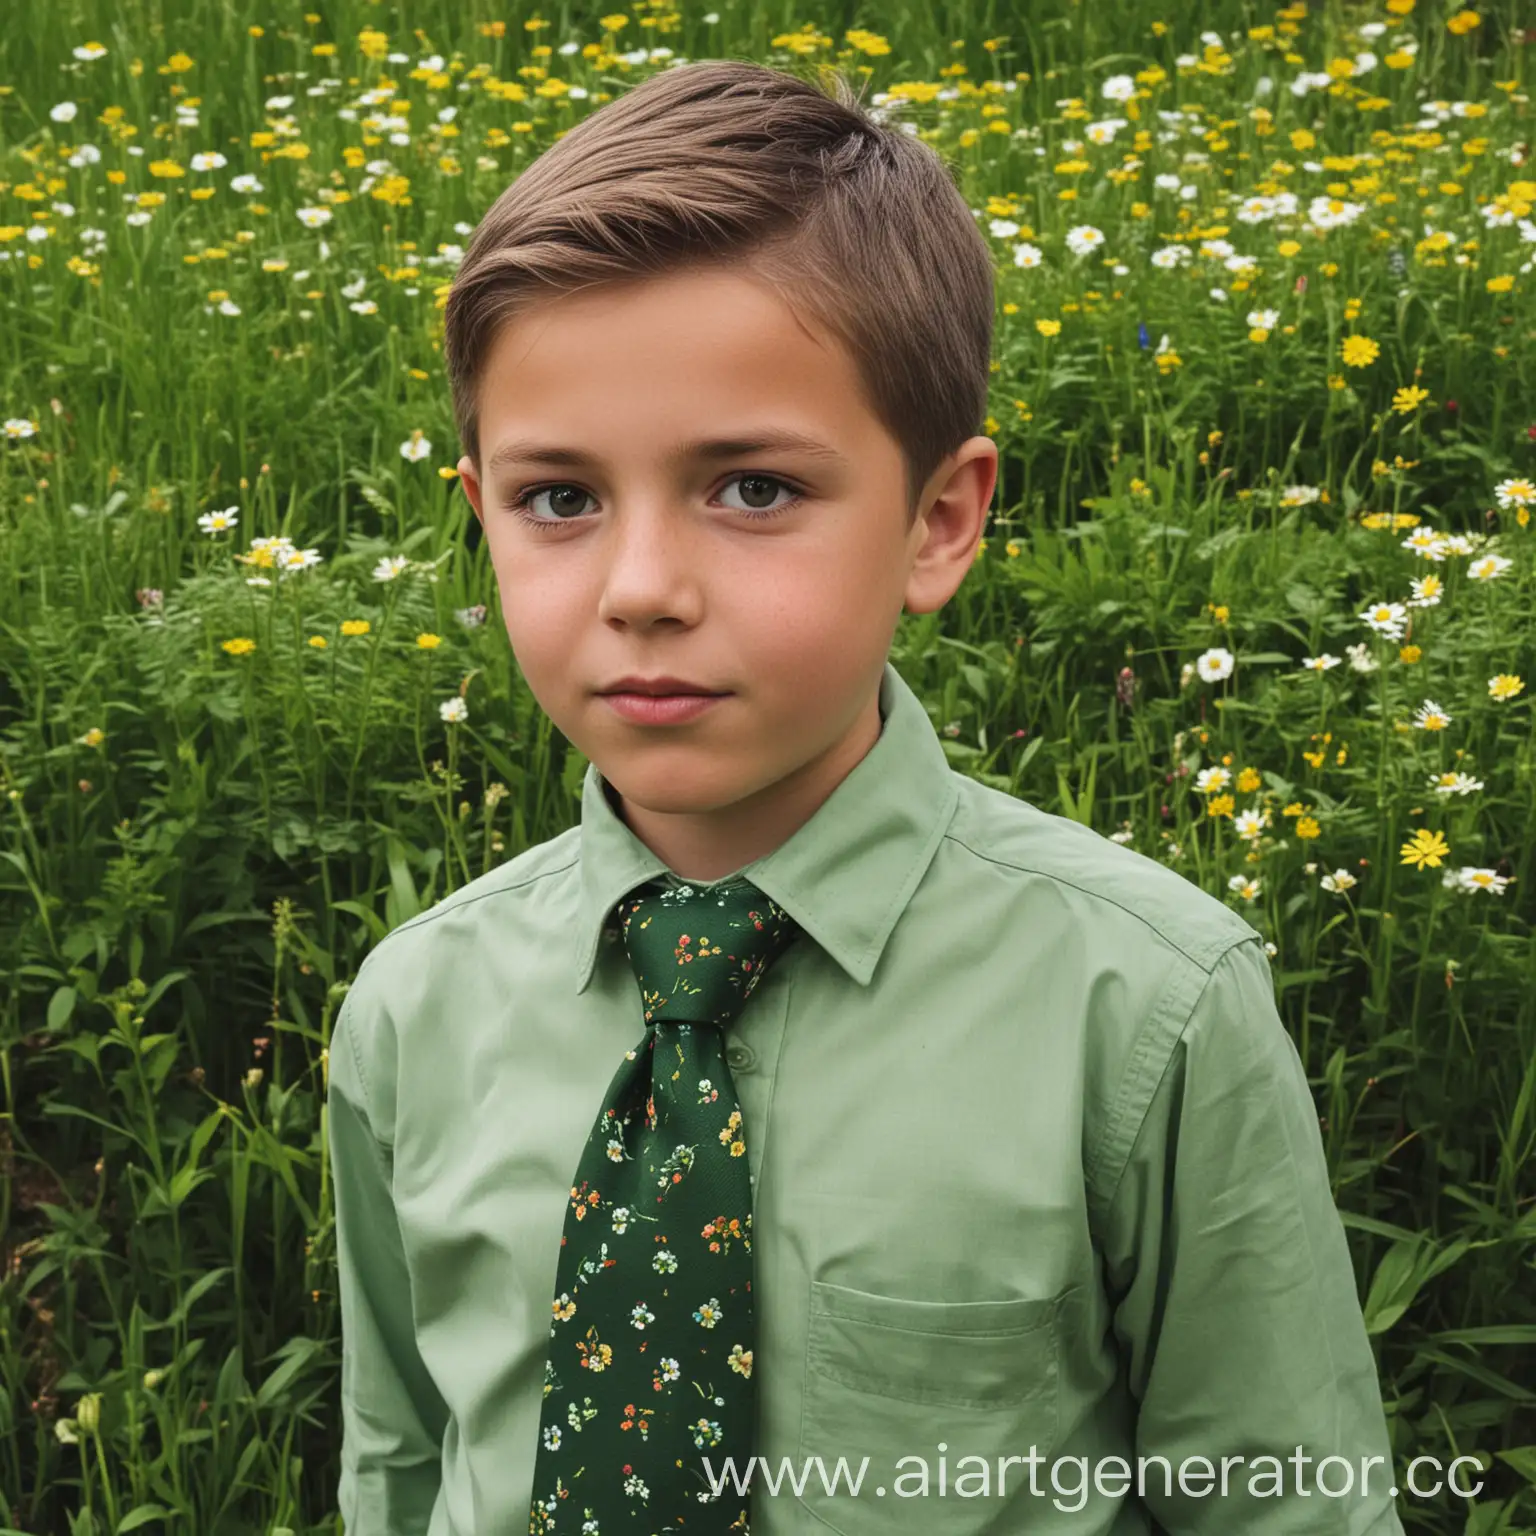 Student-Boy-in-Green-Pioneer-Tie-Surrounded-by-Nature-and-Flowers